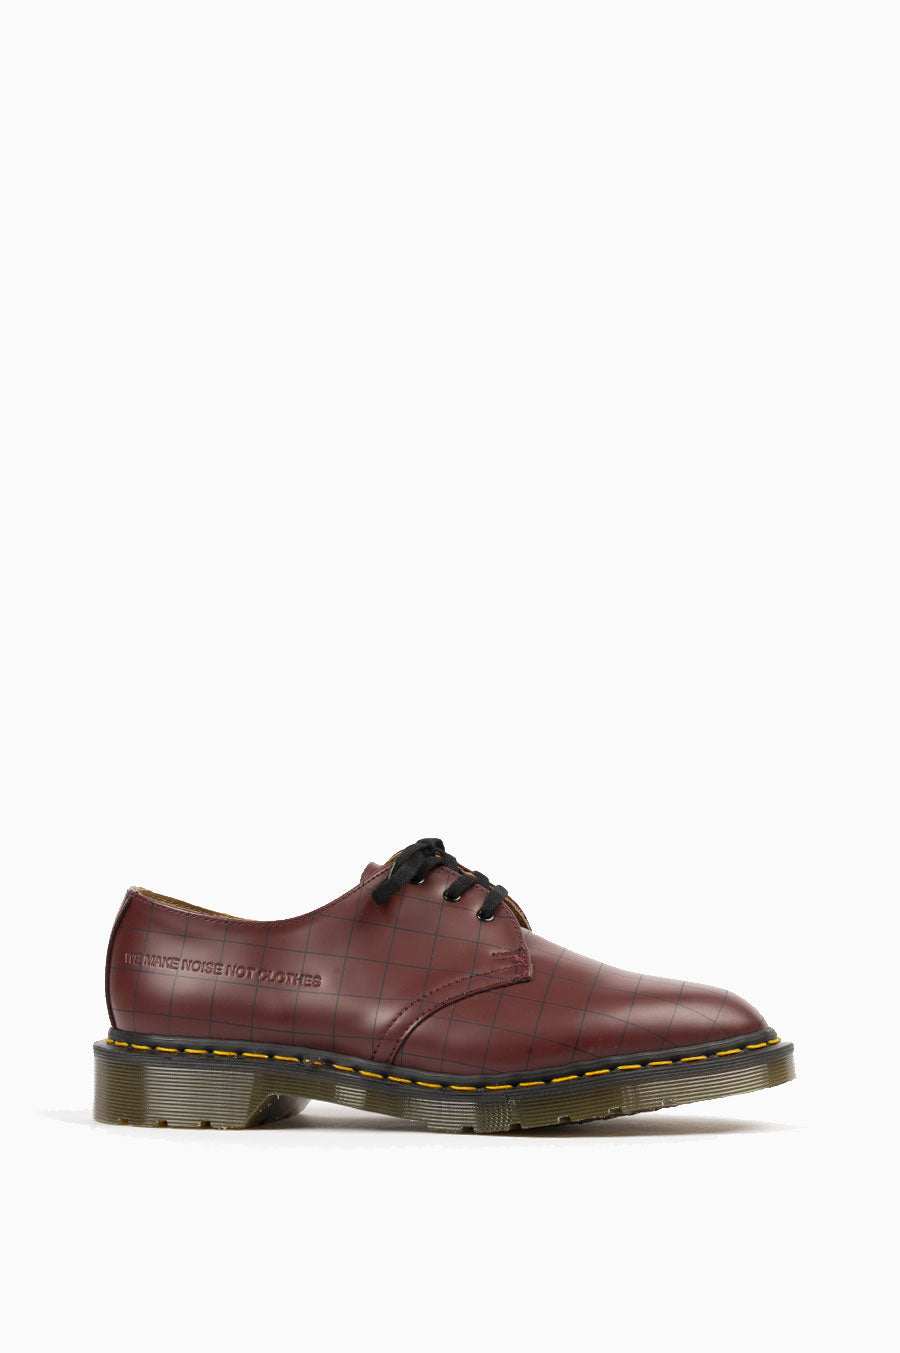 DR MARTENS X UNDERCOVER 1461 CHECK SMOOTH CHERRY